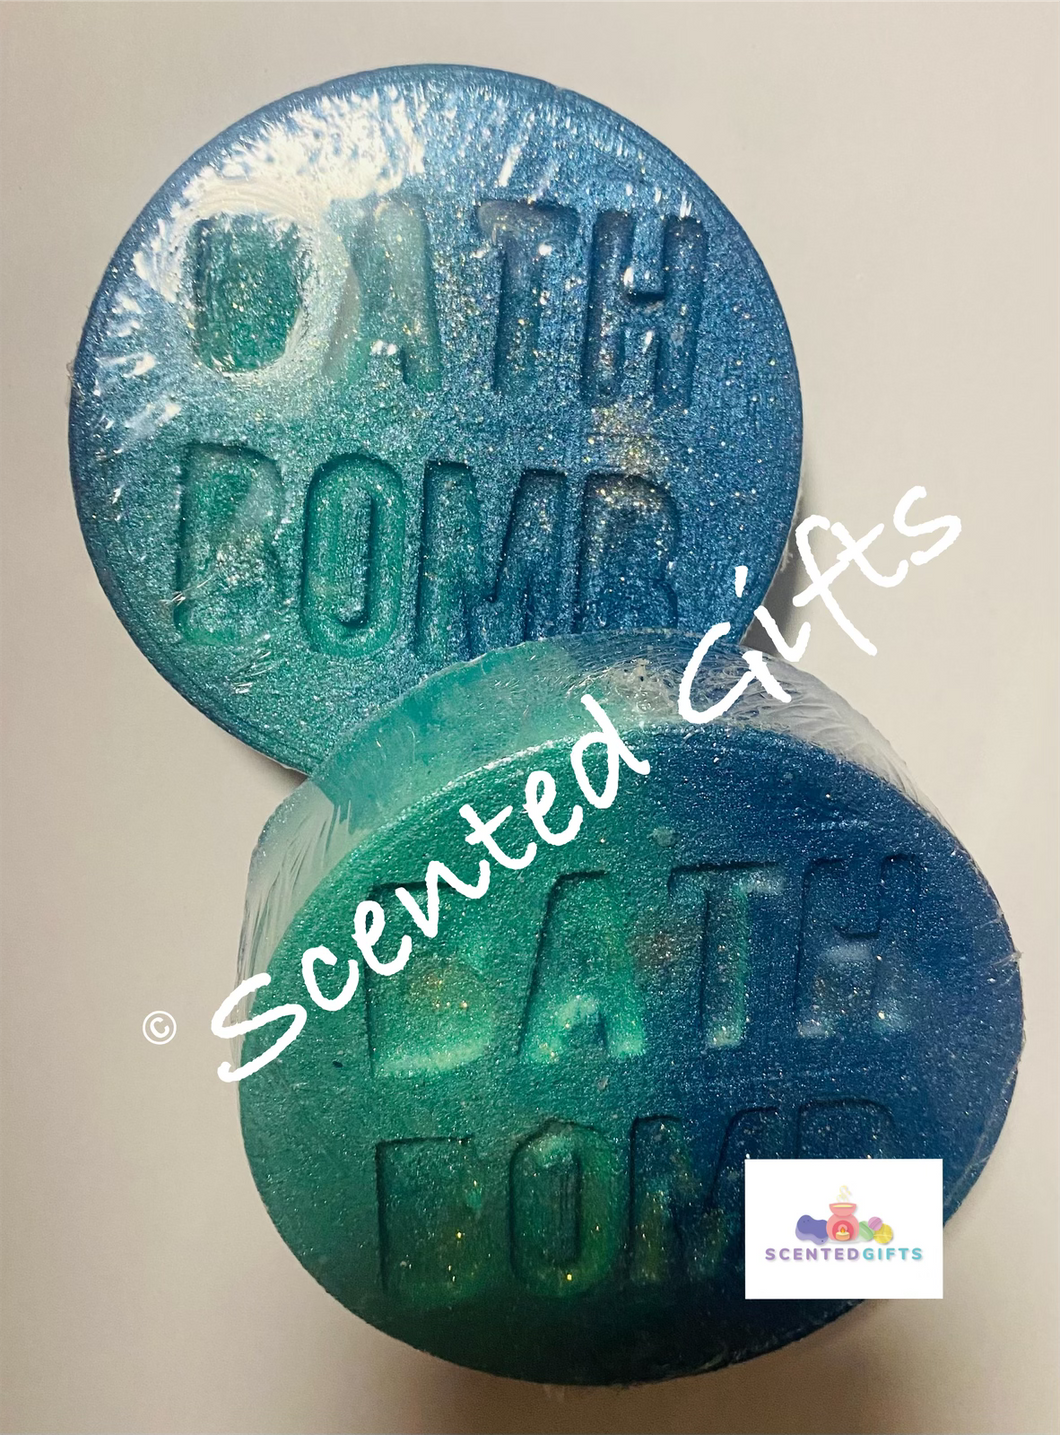 Dark Orchid Bath Bomb  An airbrushed ombre green and blue coloured disc shaped bath with bath bomb detailed indentation, coloured hidden embeds and scented in dark orchid (TF dupe).  